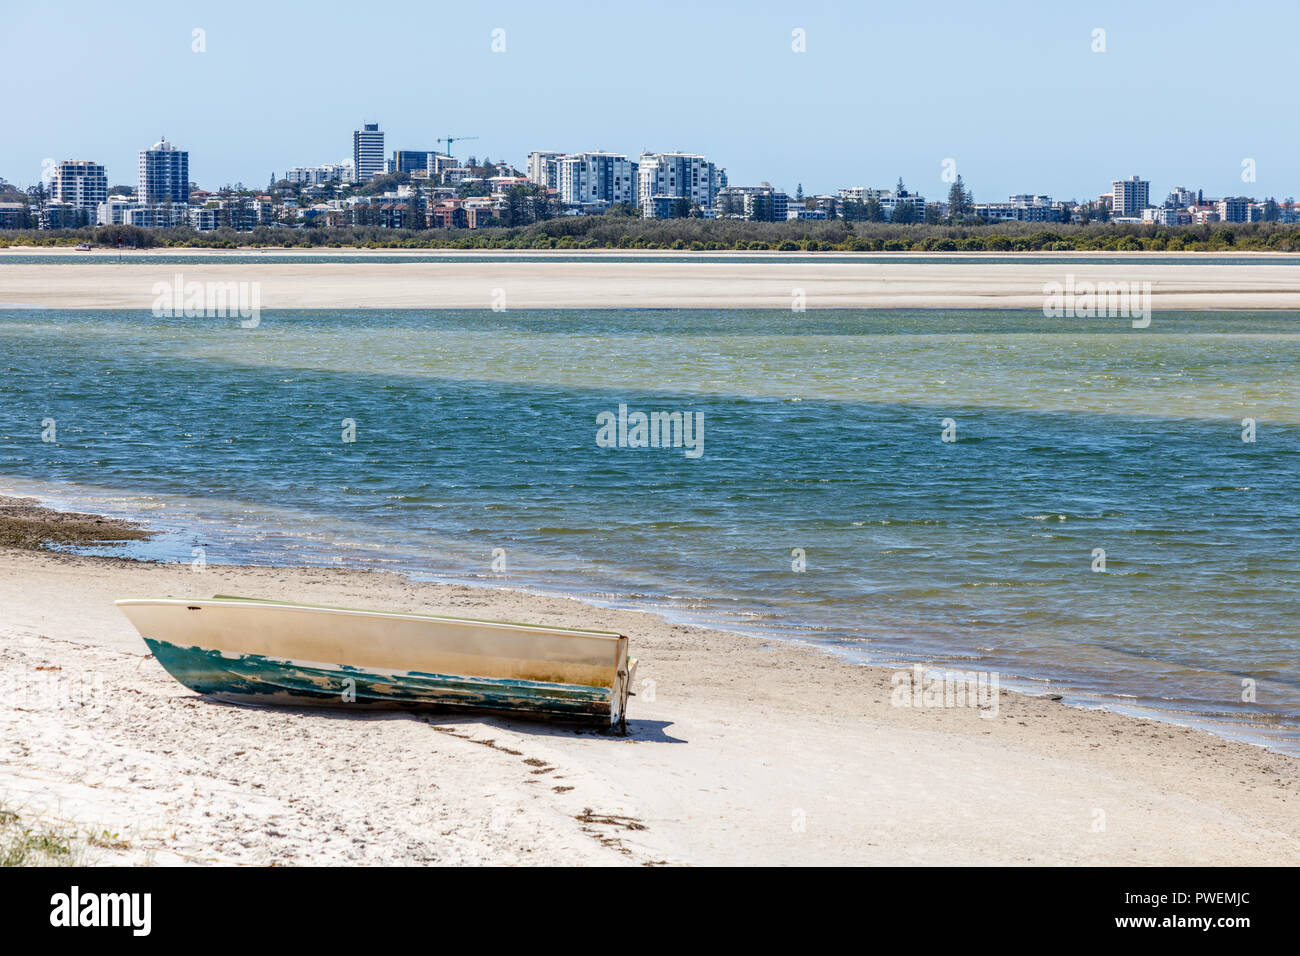 Old wooden boat sitting on the sand at Golden Beach. View of Caloundra skyline on the background. Sunshine Coast, Queensland, Australia Stock Photo